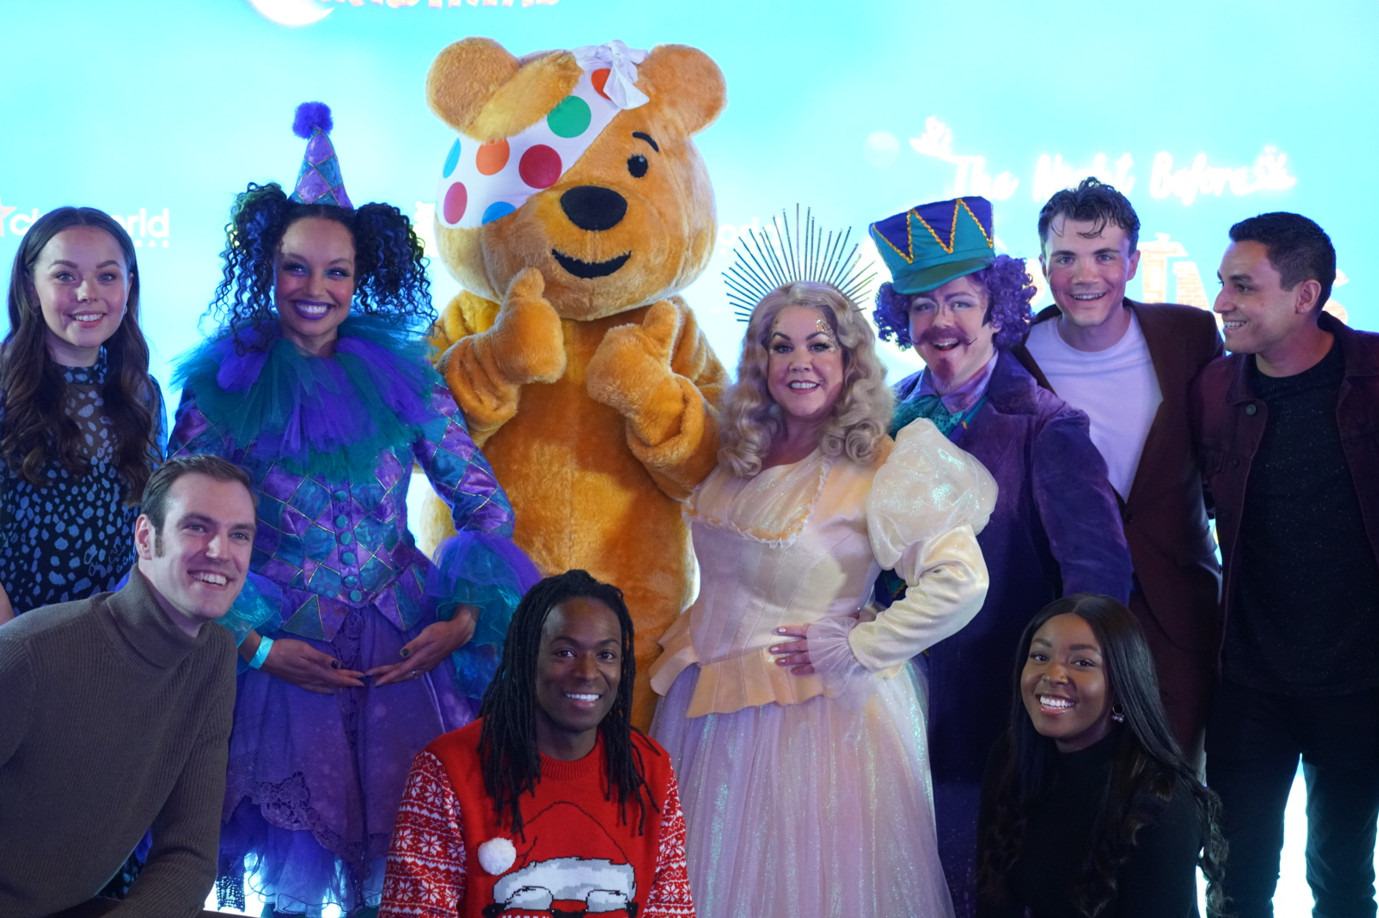 The cbeebies christmas show returns with the night before christmas!